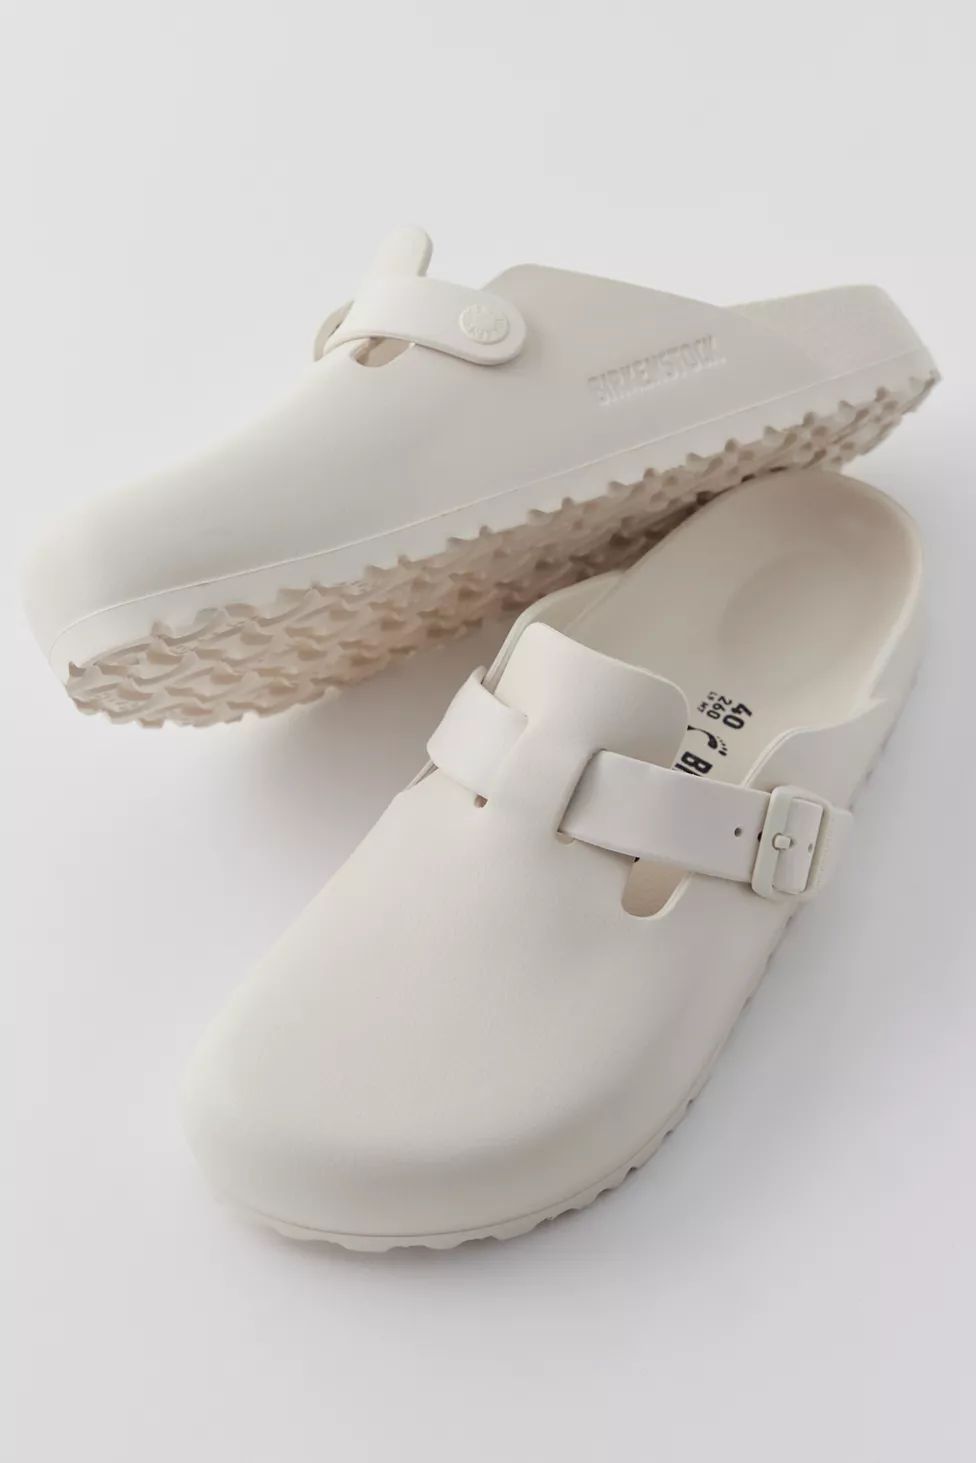 Birkenstock Boston EVA Clog | Urban Outfitters (US and RoW)